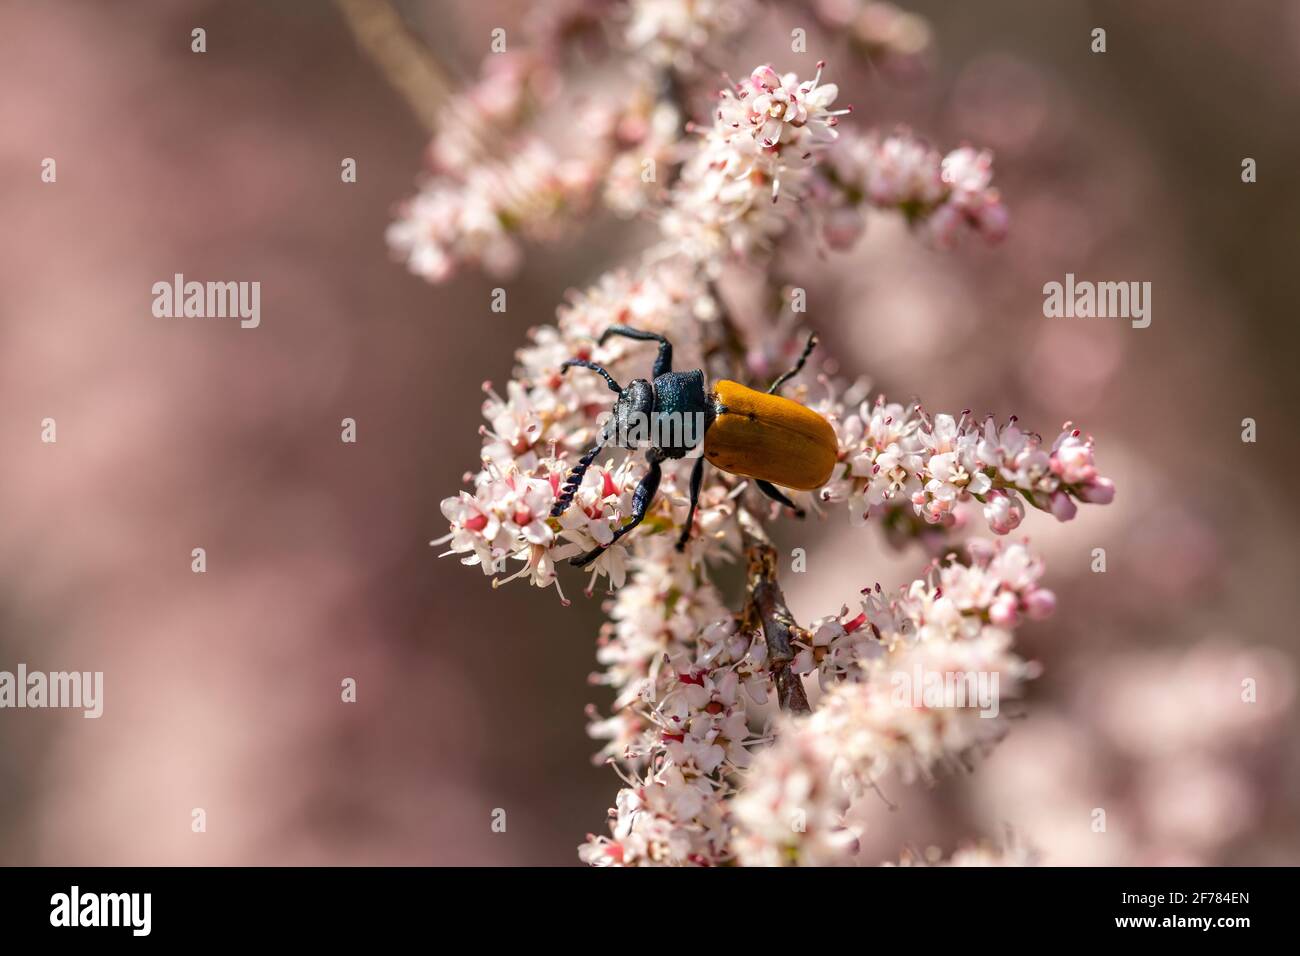 A bug’s Spring life. A black and yellow beetle enjoys springtime among the flowered branches of a French Tamarisk. Stock Photo